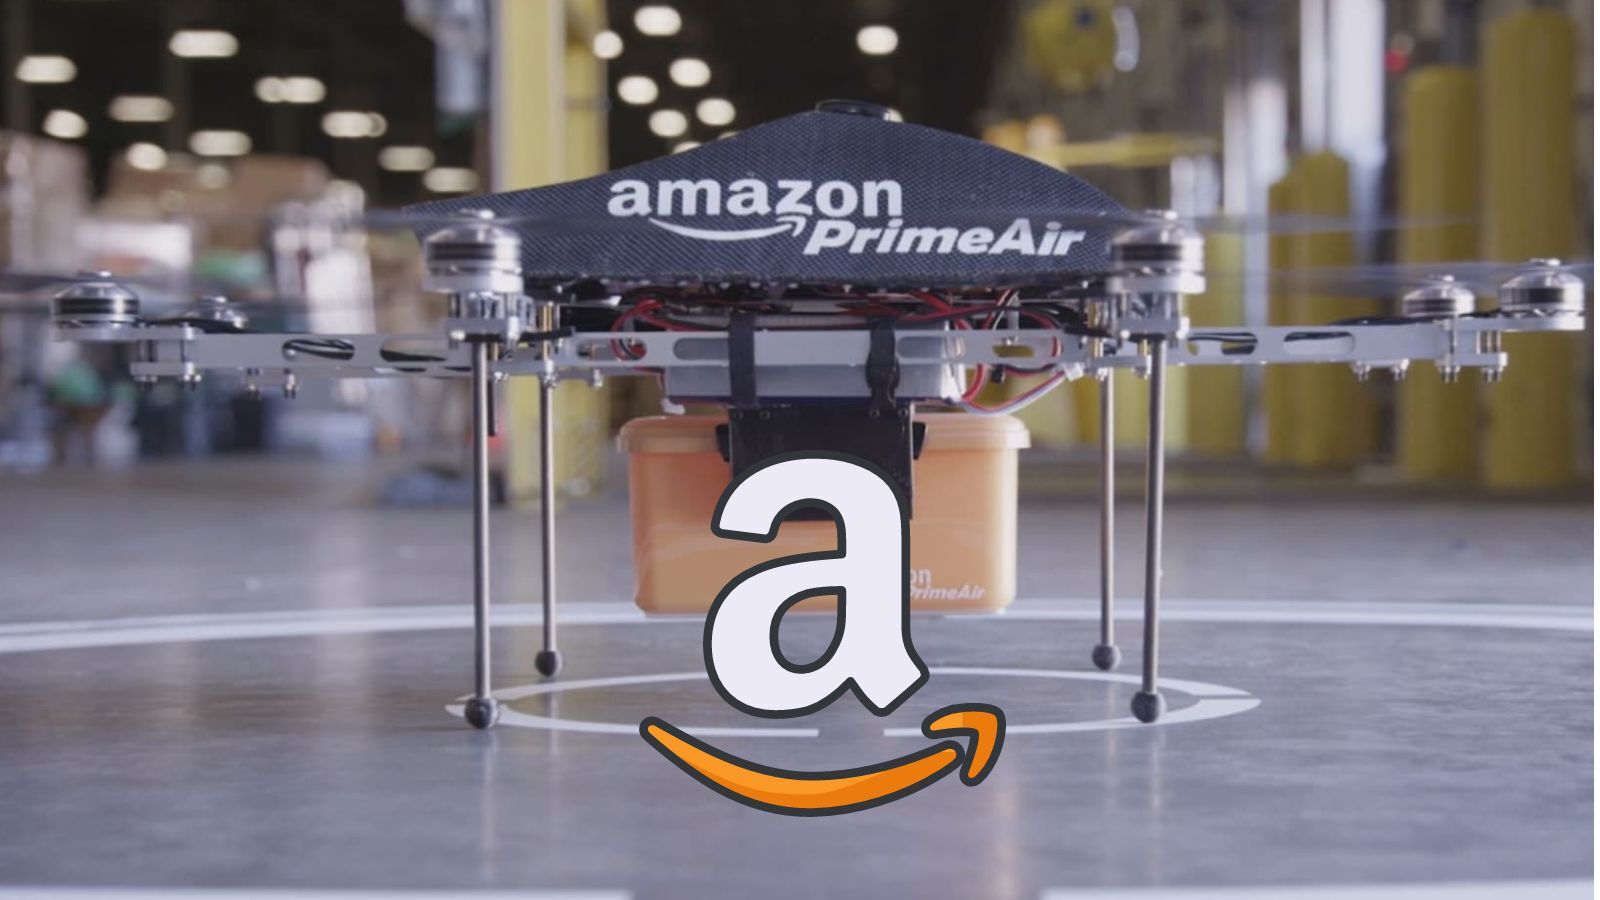 Does Amazon Use Drones? (Here Is the Latest Development)